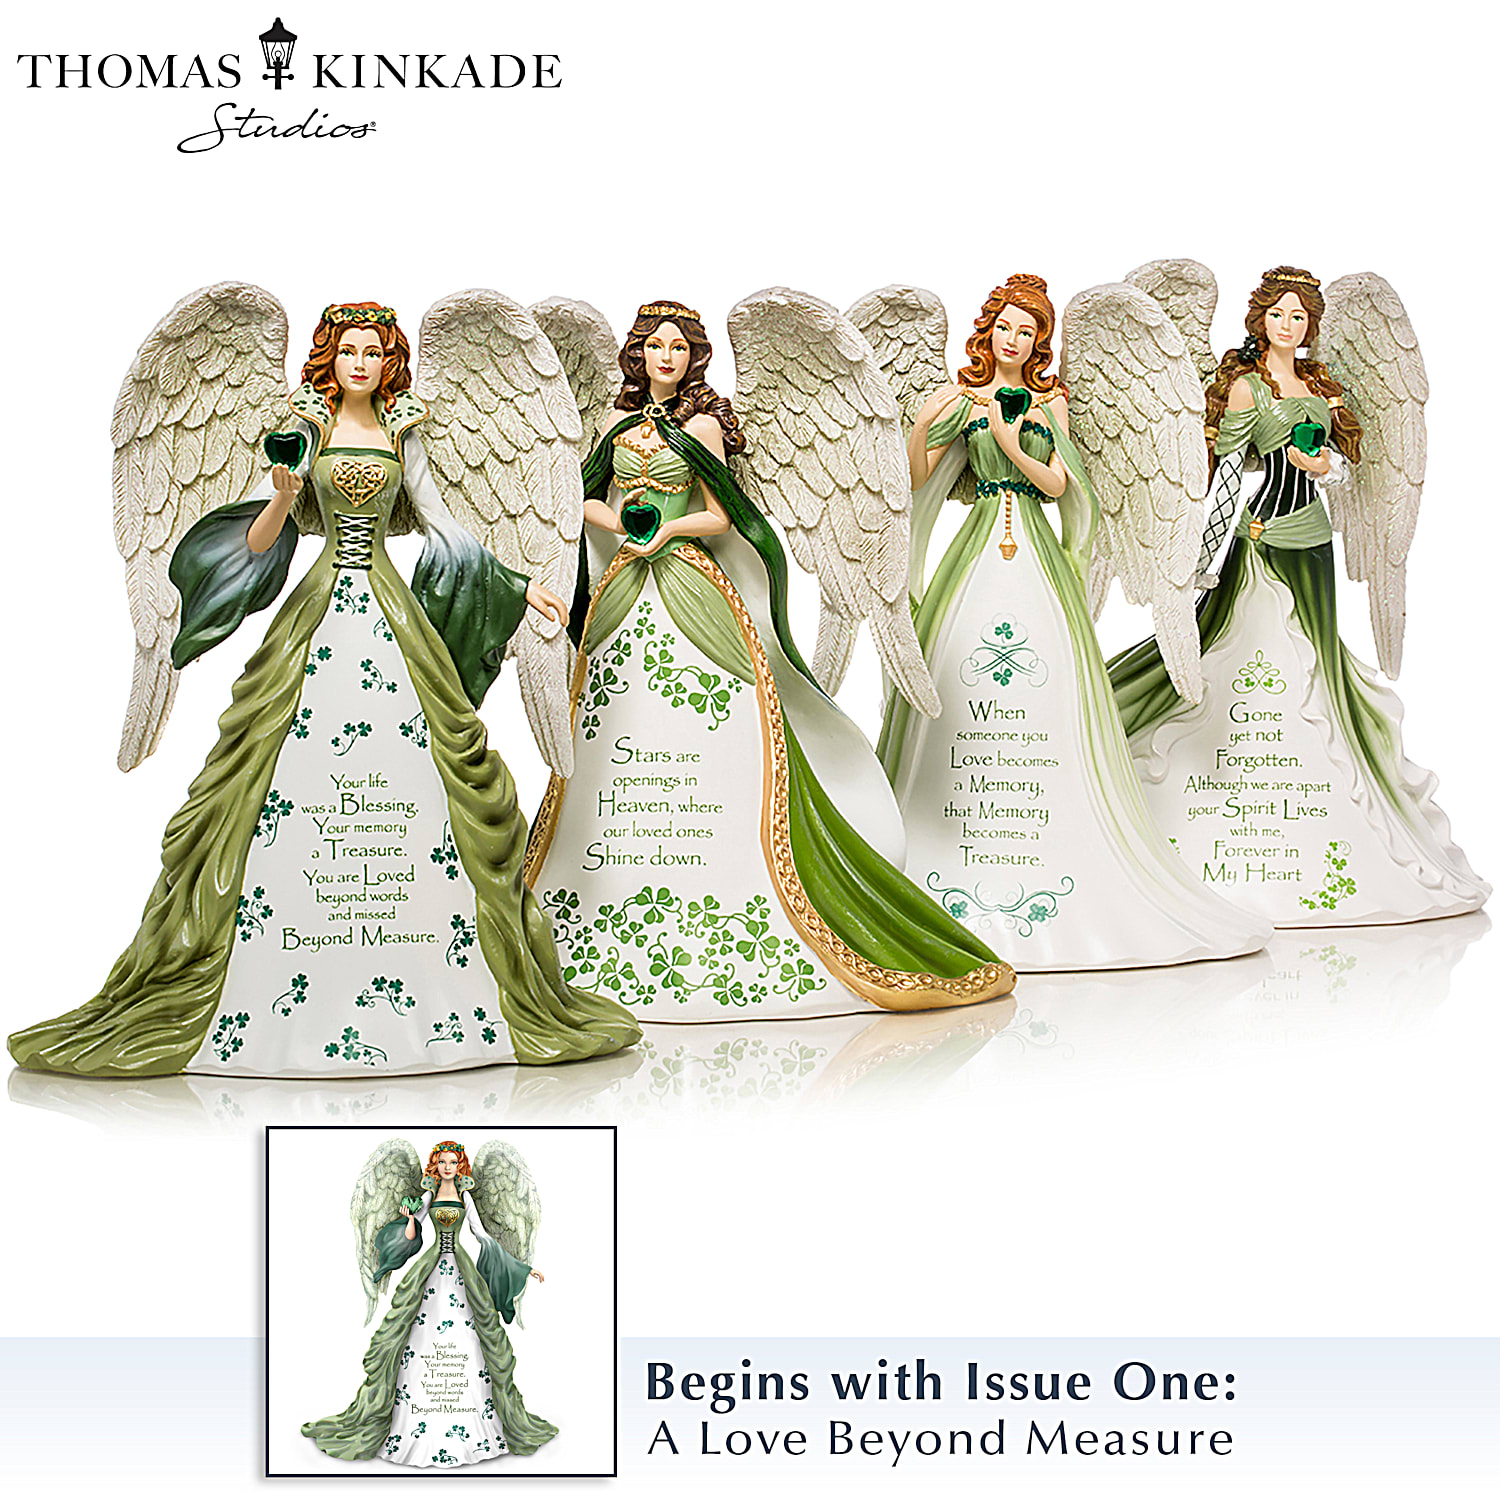 Precious Moments Angel Figurines: Messengers Of Comfort And